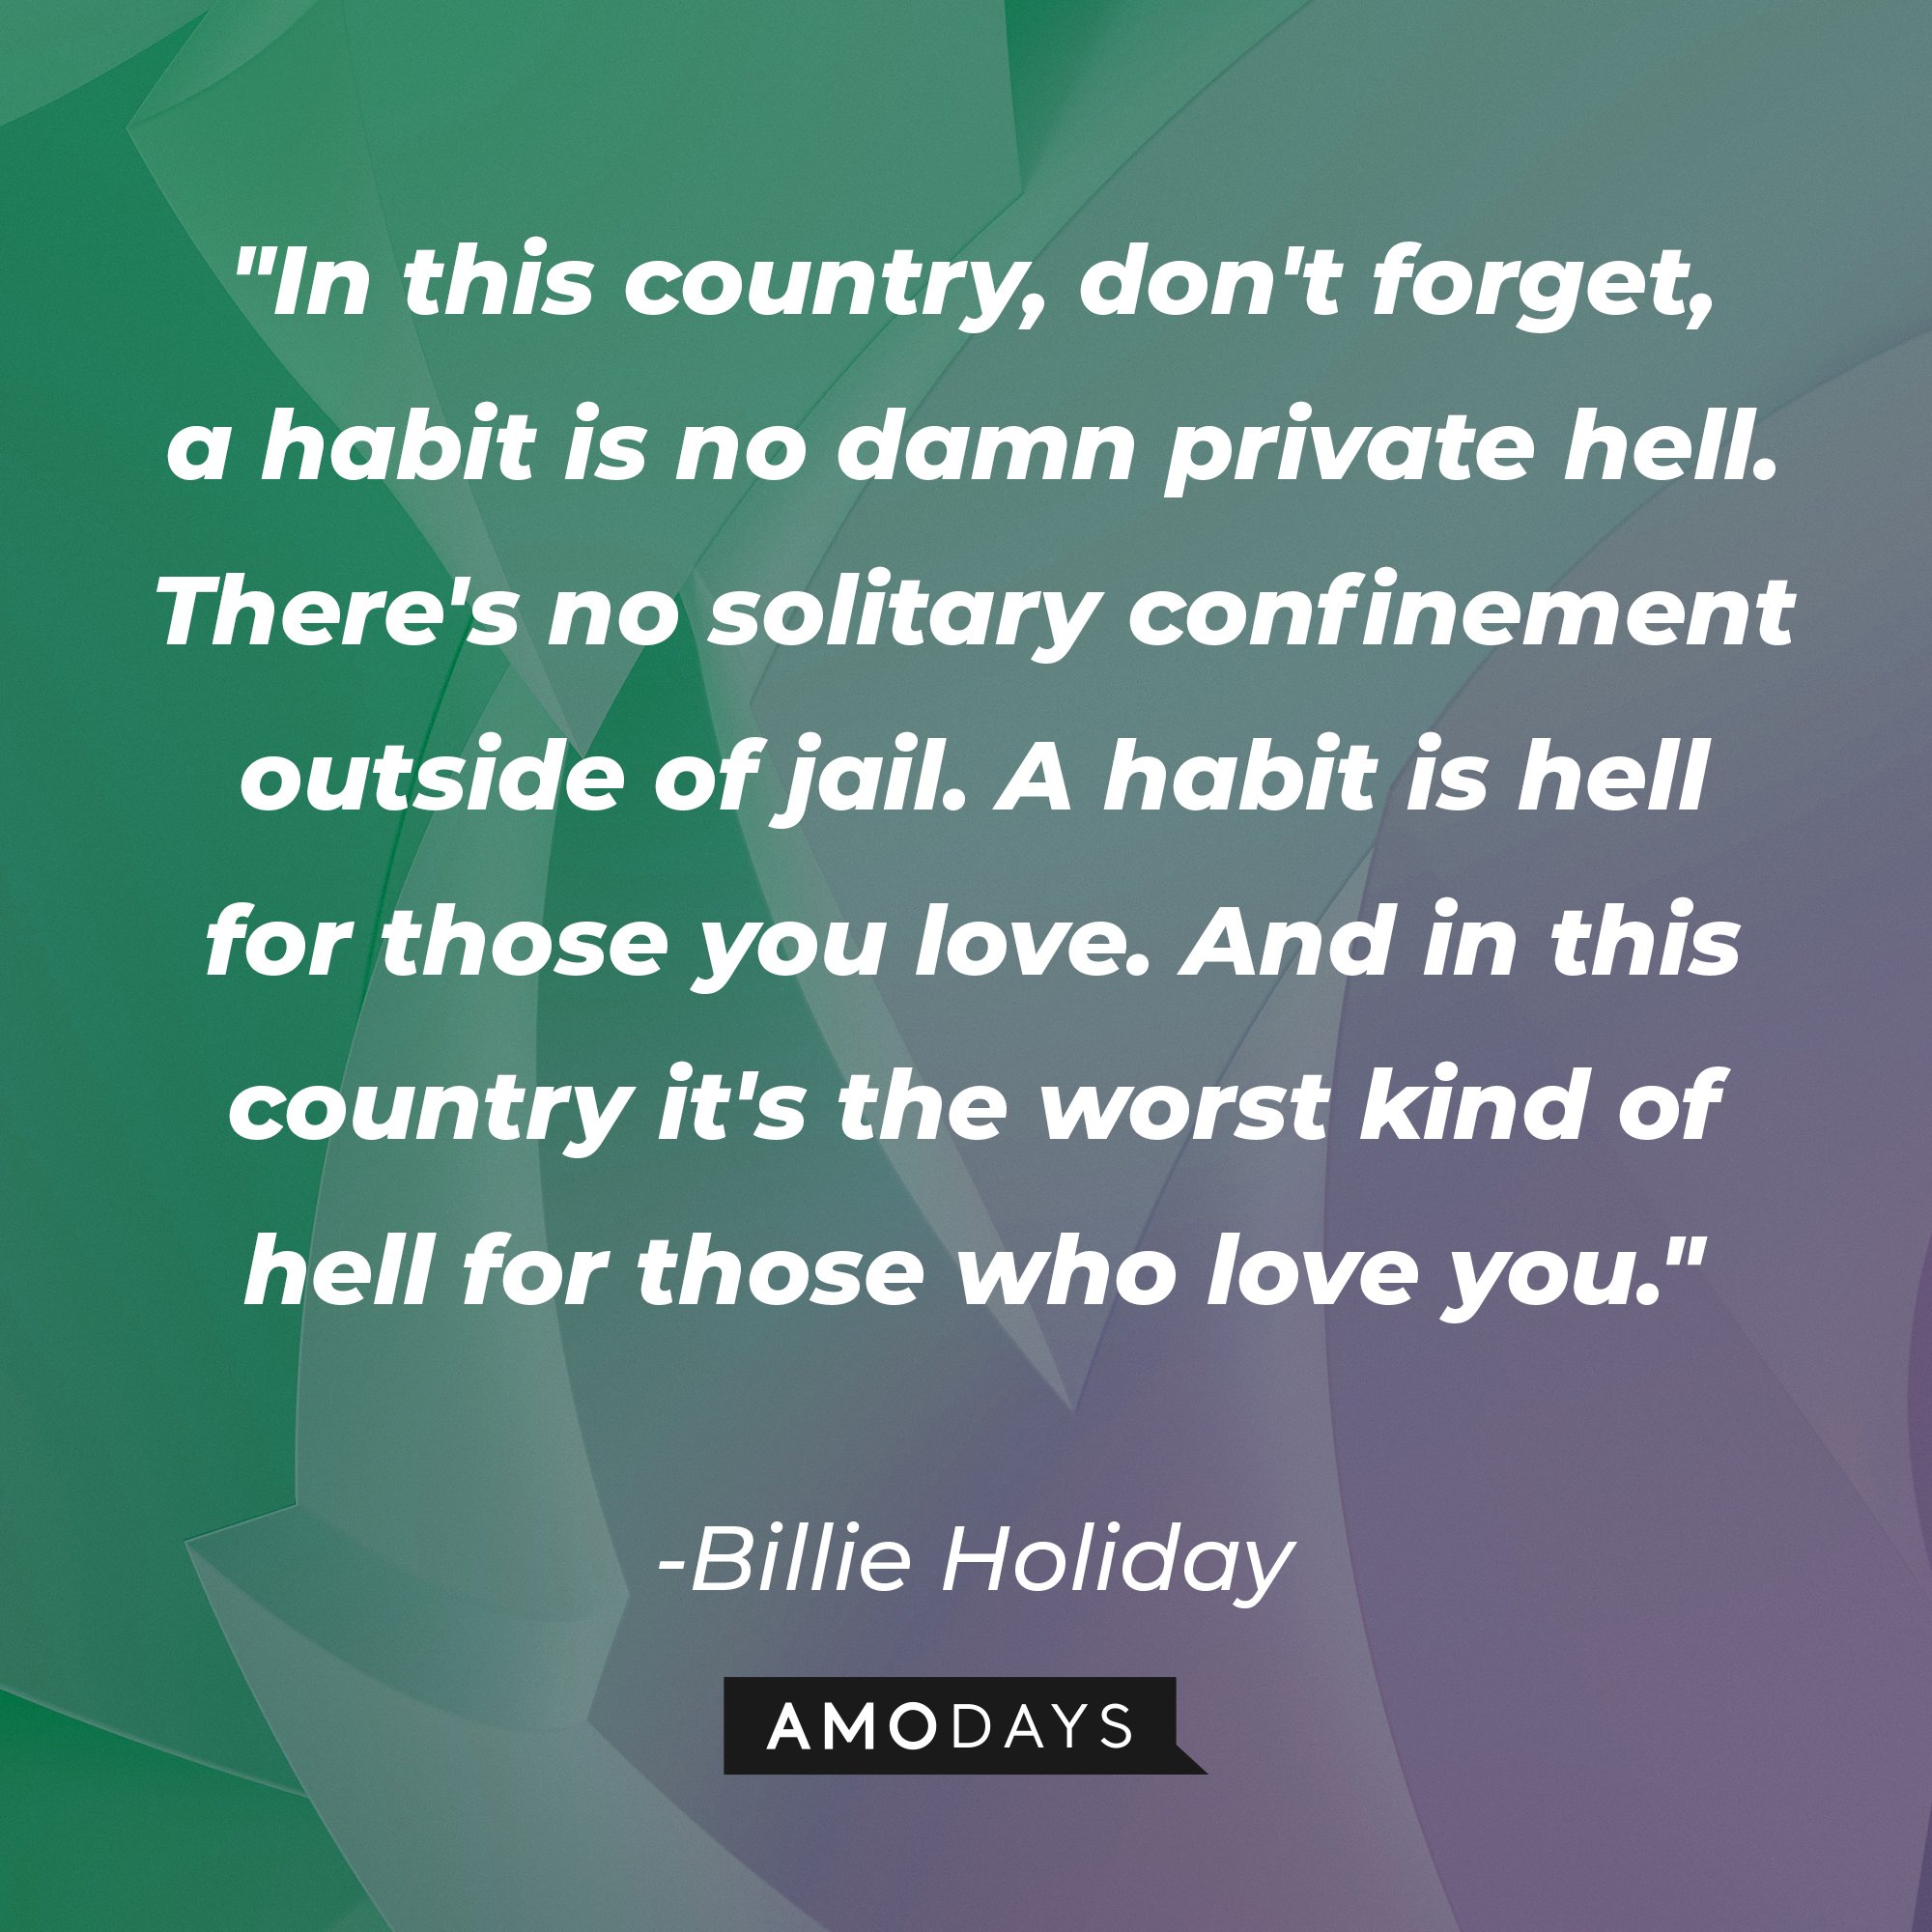 Billie Holiday's quote "In this country, don't forget, a habit is no damn private hell. There's no solitary confinement outside of jail. A habit is hell for those you love. And in this country it's the worst kind of hell for those who love you." | Source: Unsplash.com